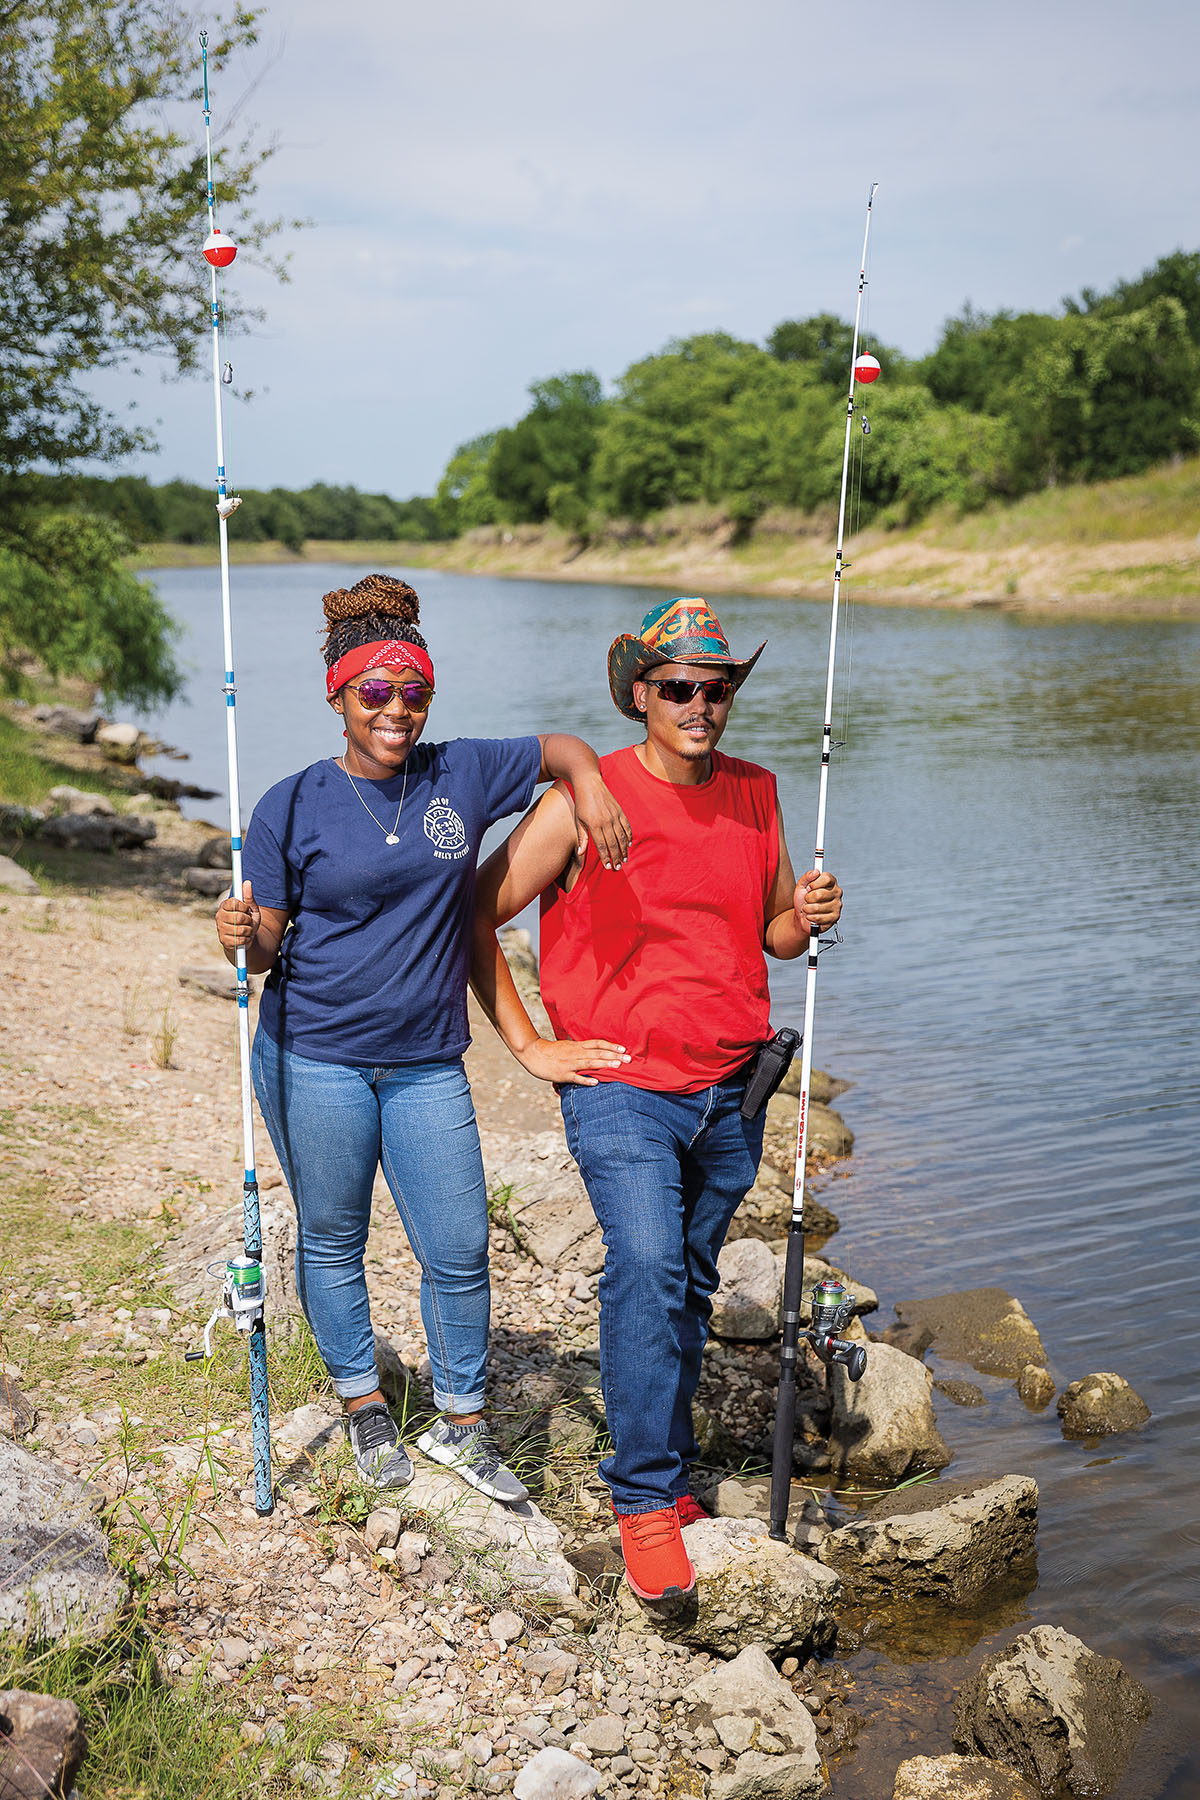 Two people stand holding fishing rods on the rocky banks of the Brazos river